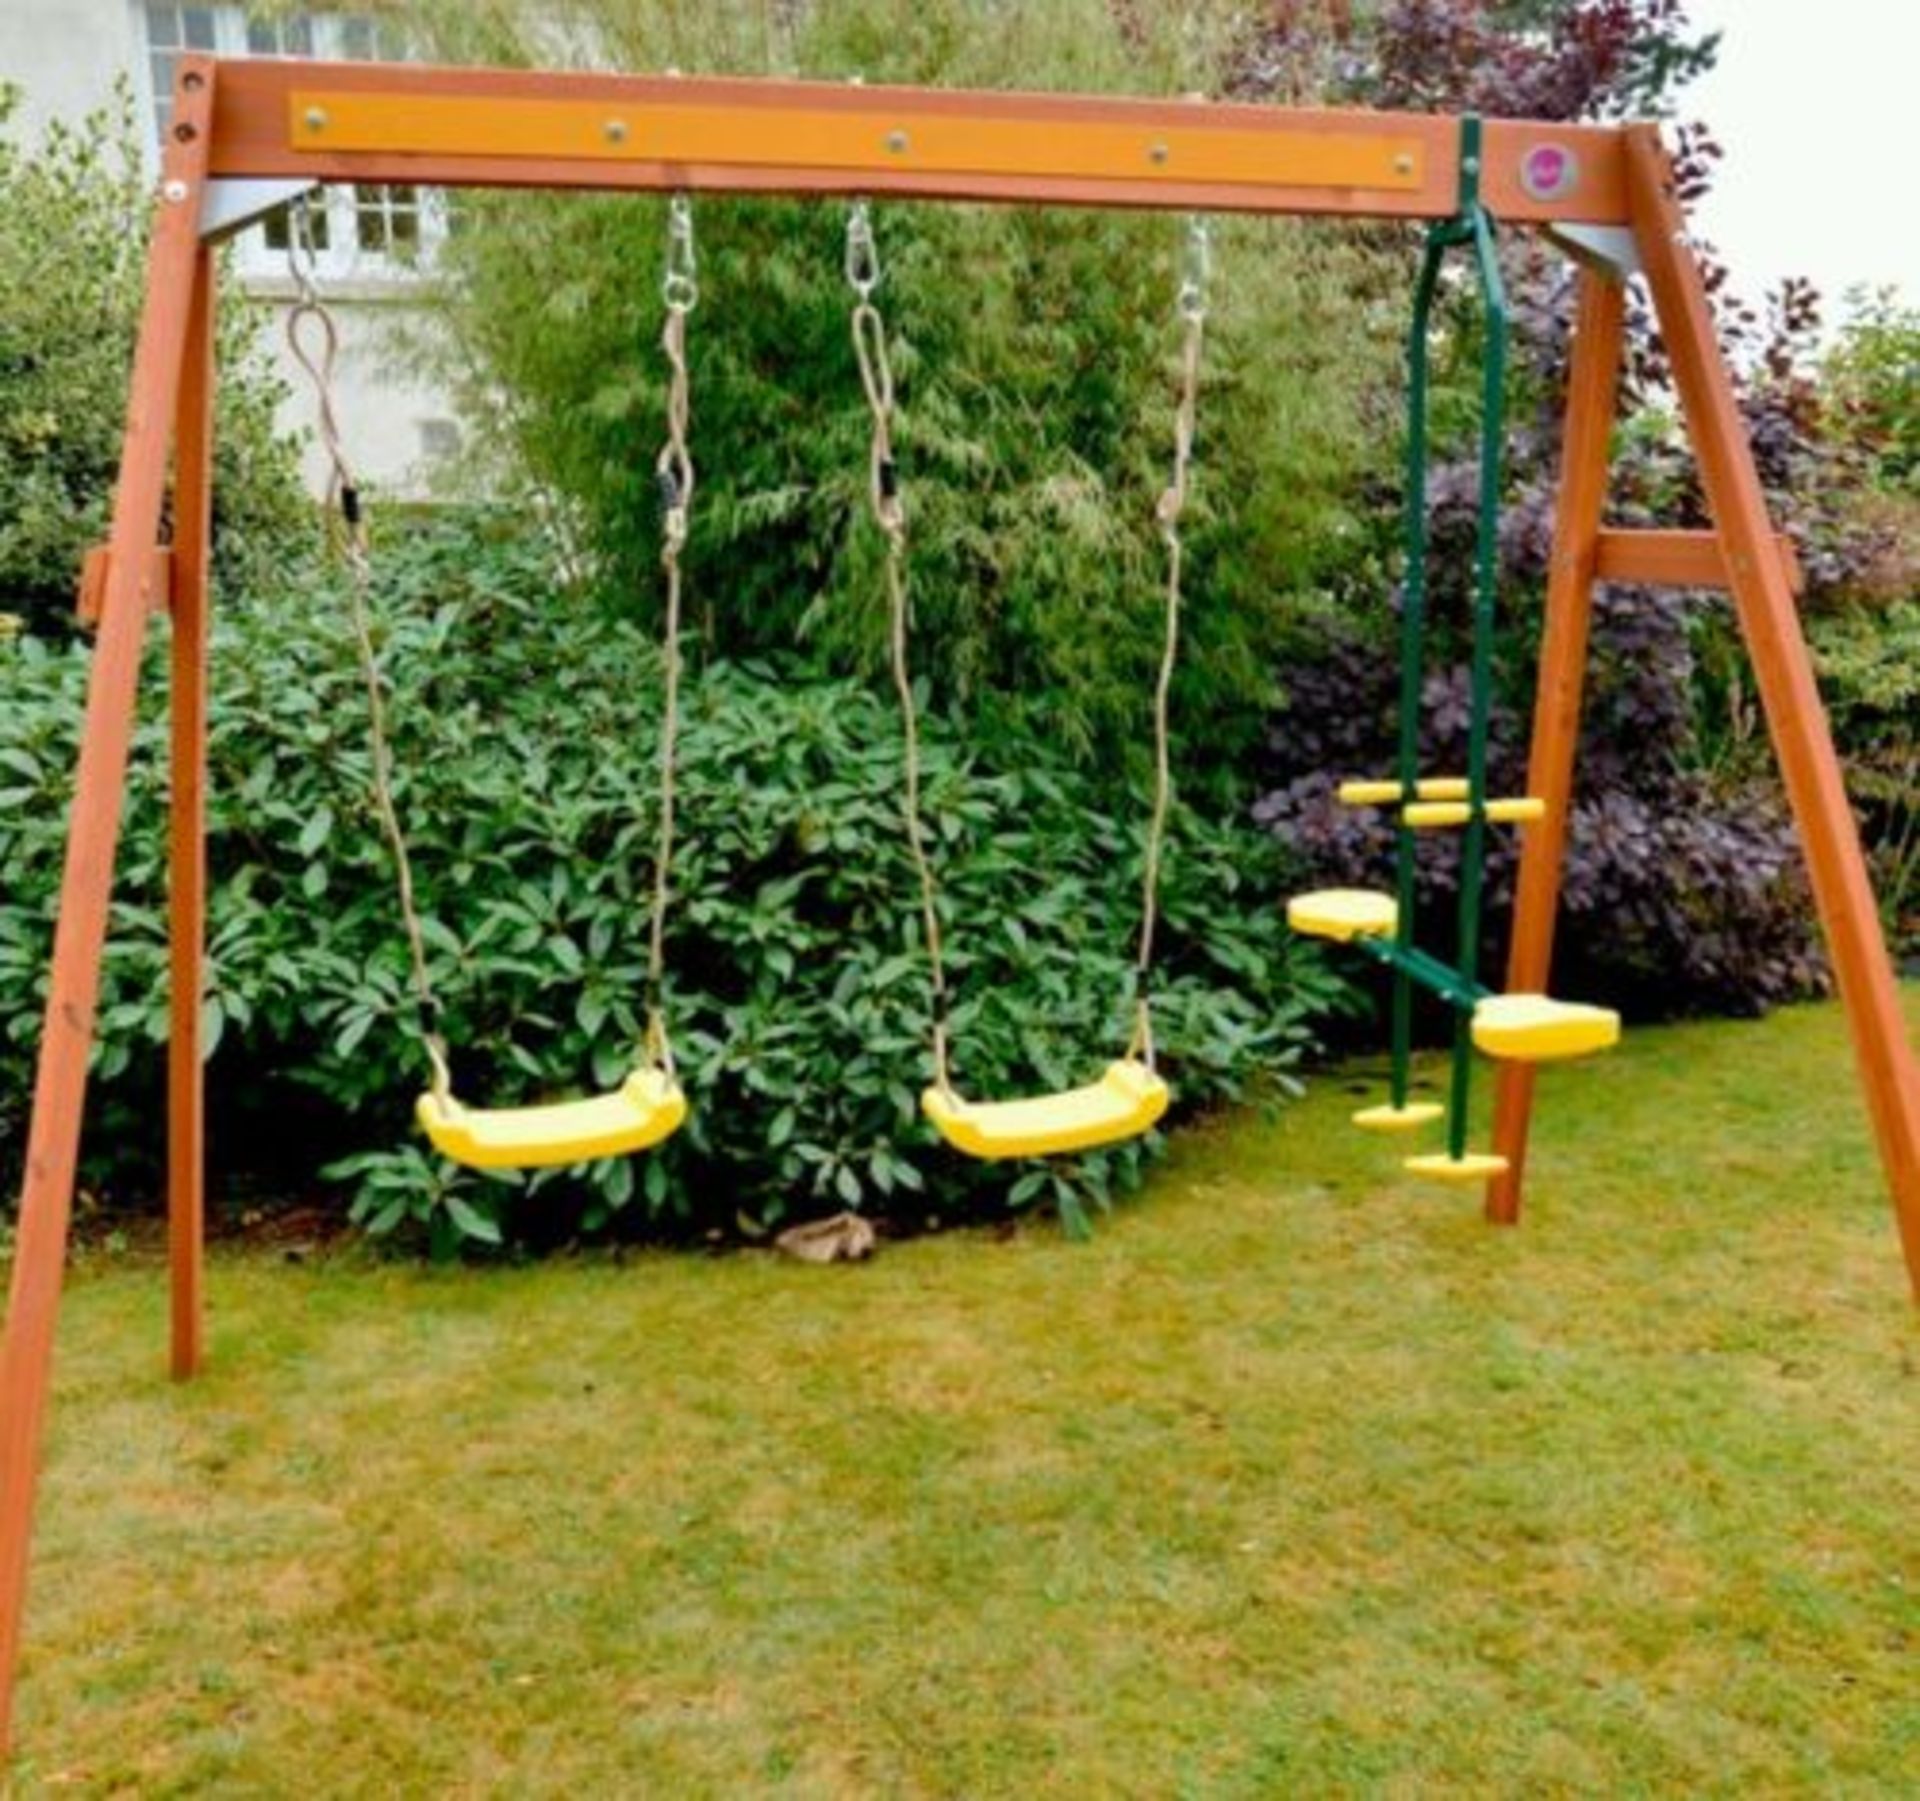 New Plum Colobus Double Swing with Glider Set RRP £350. Featuring two swings and a two-seat